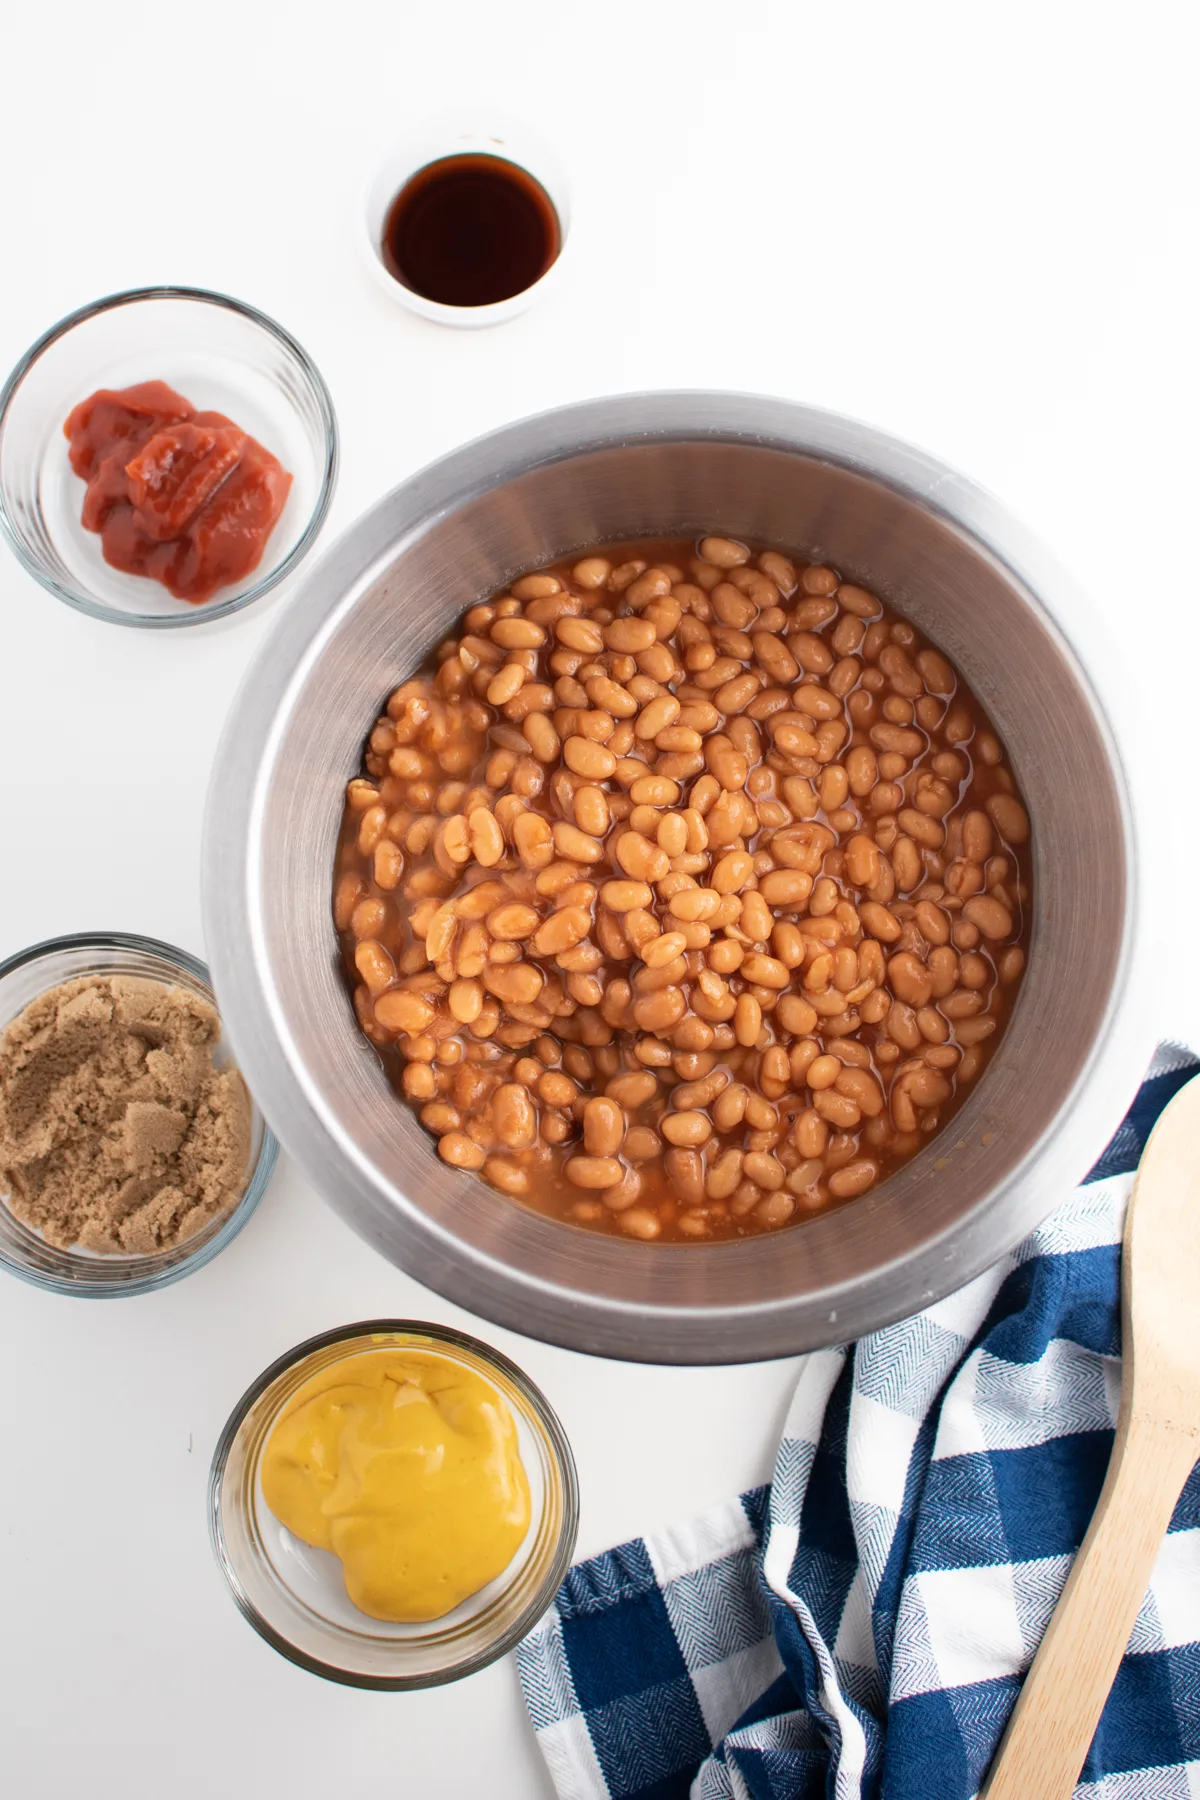 Baked beans, ketchup, brown sugar and mustard in mixing bowls on kitchen counter.